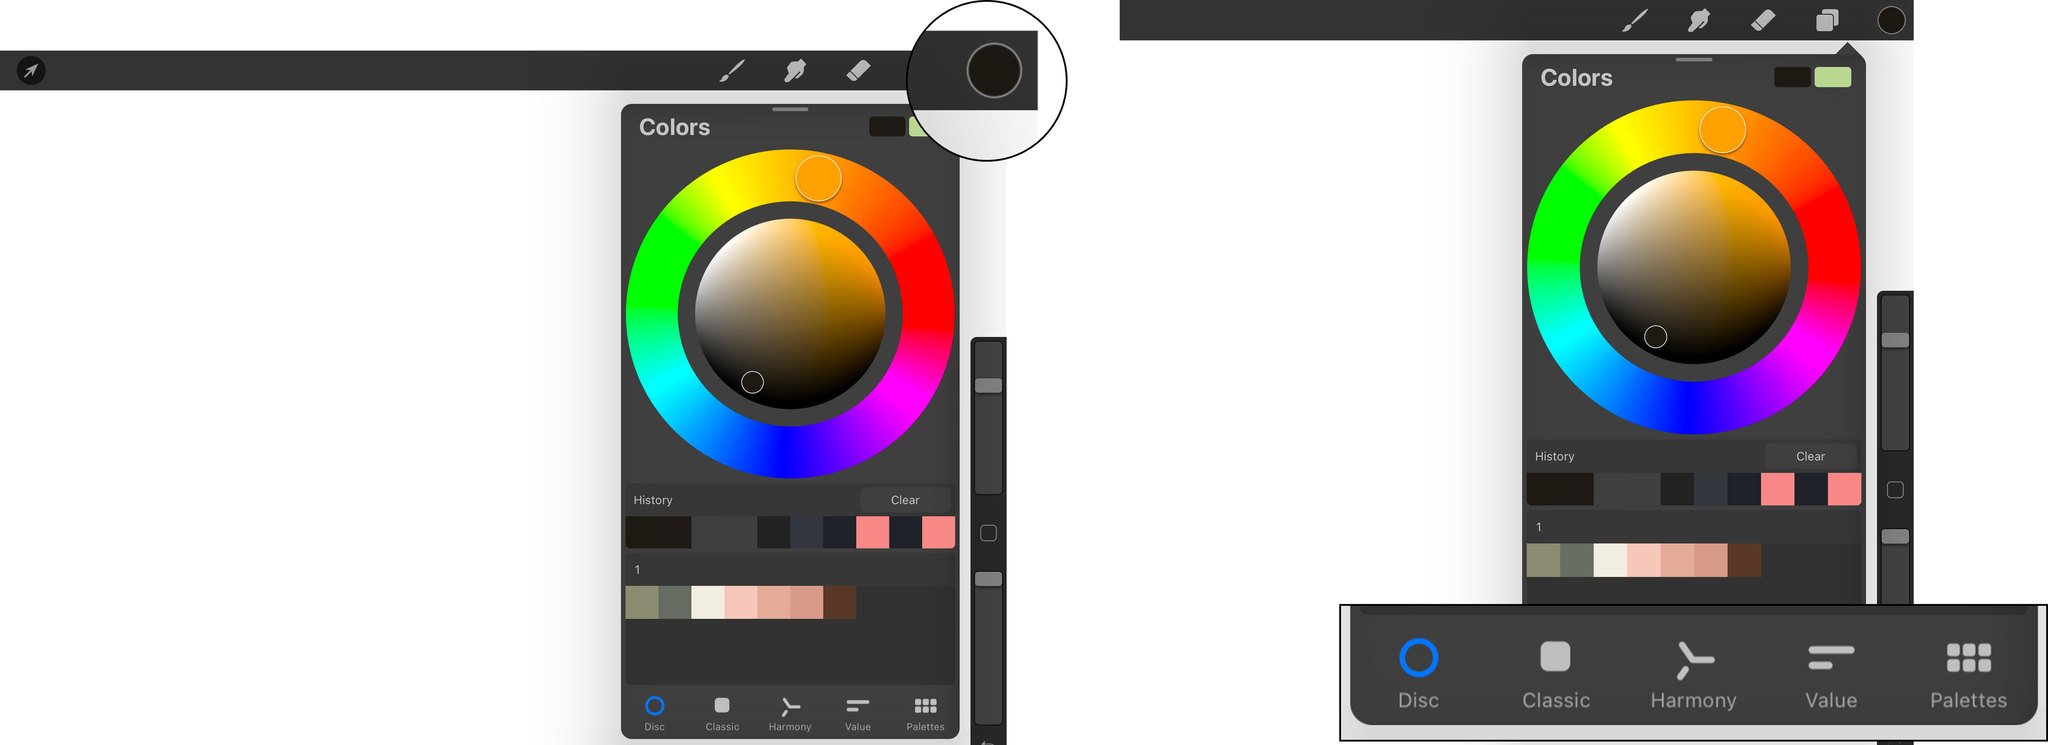 To change the Colors of the Brush, tap on the Colors Circle icon and select between Disc, Classic, Harmony, or Value color options.